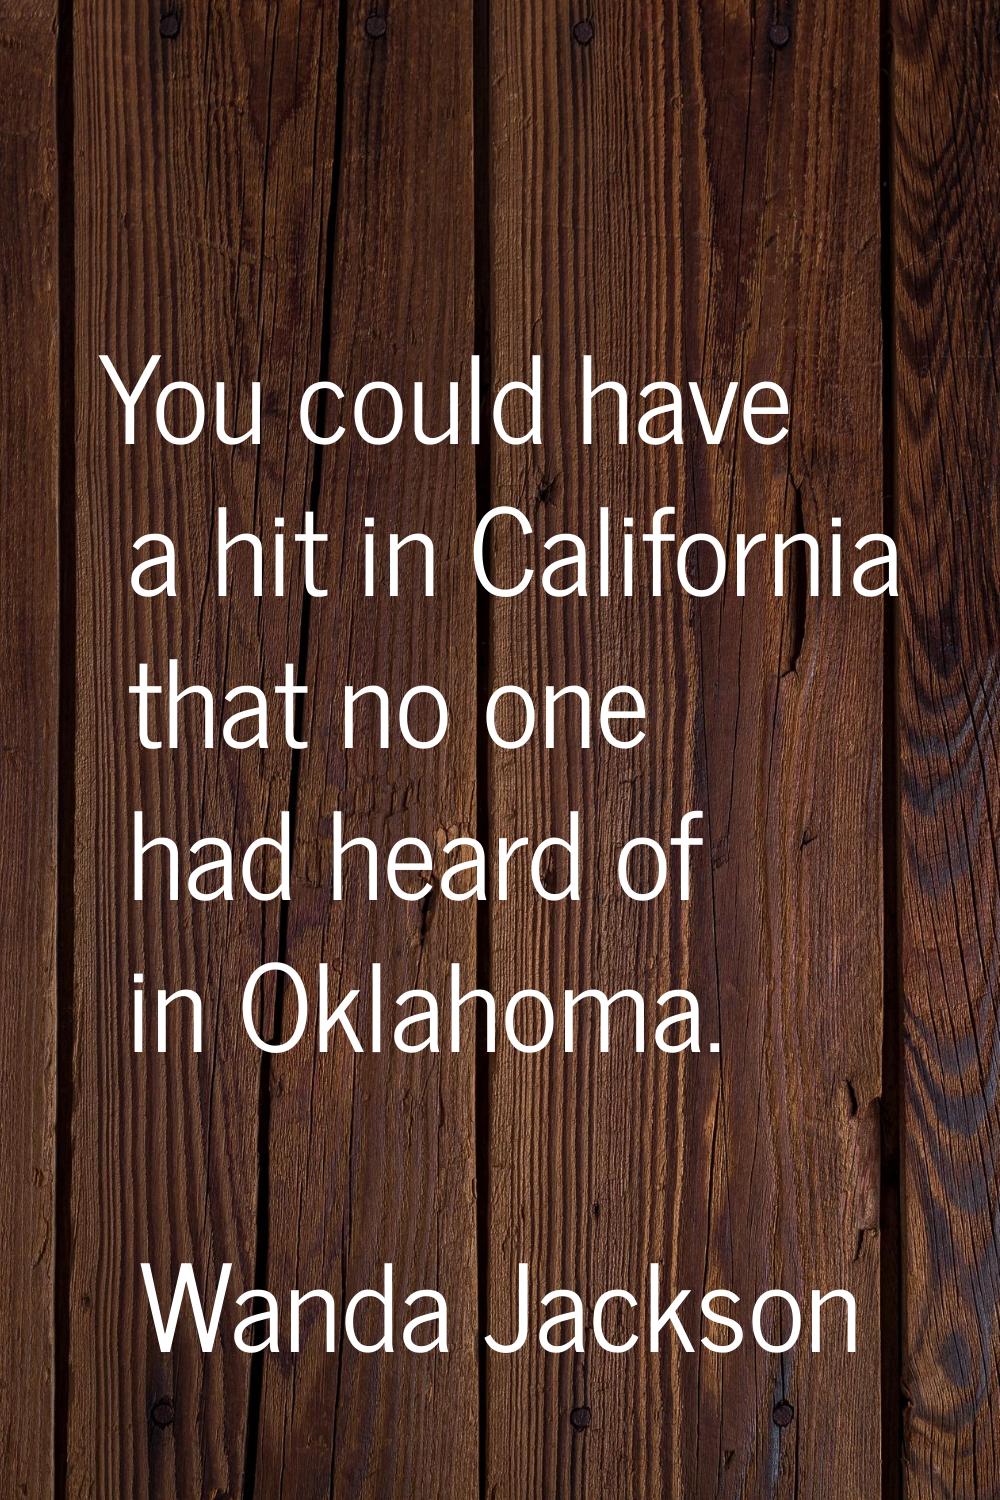 You could have a hit in California that no one had heard of in Oklahoma.